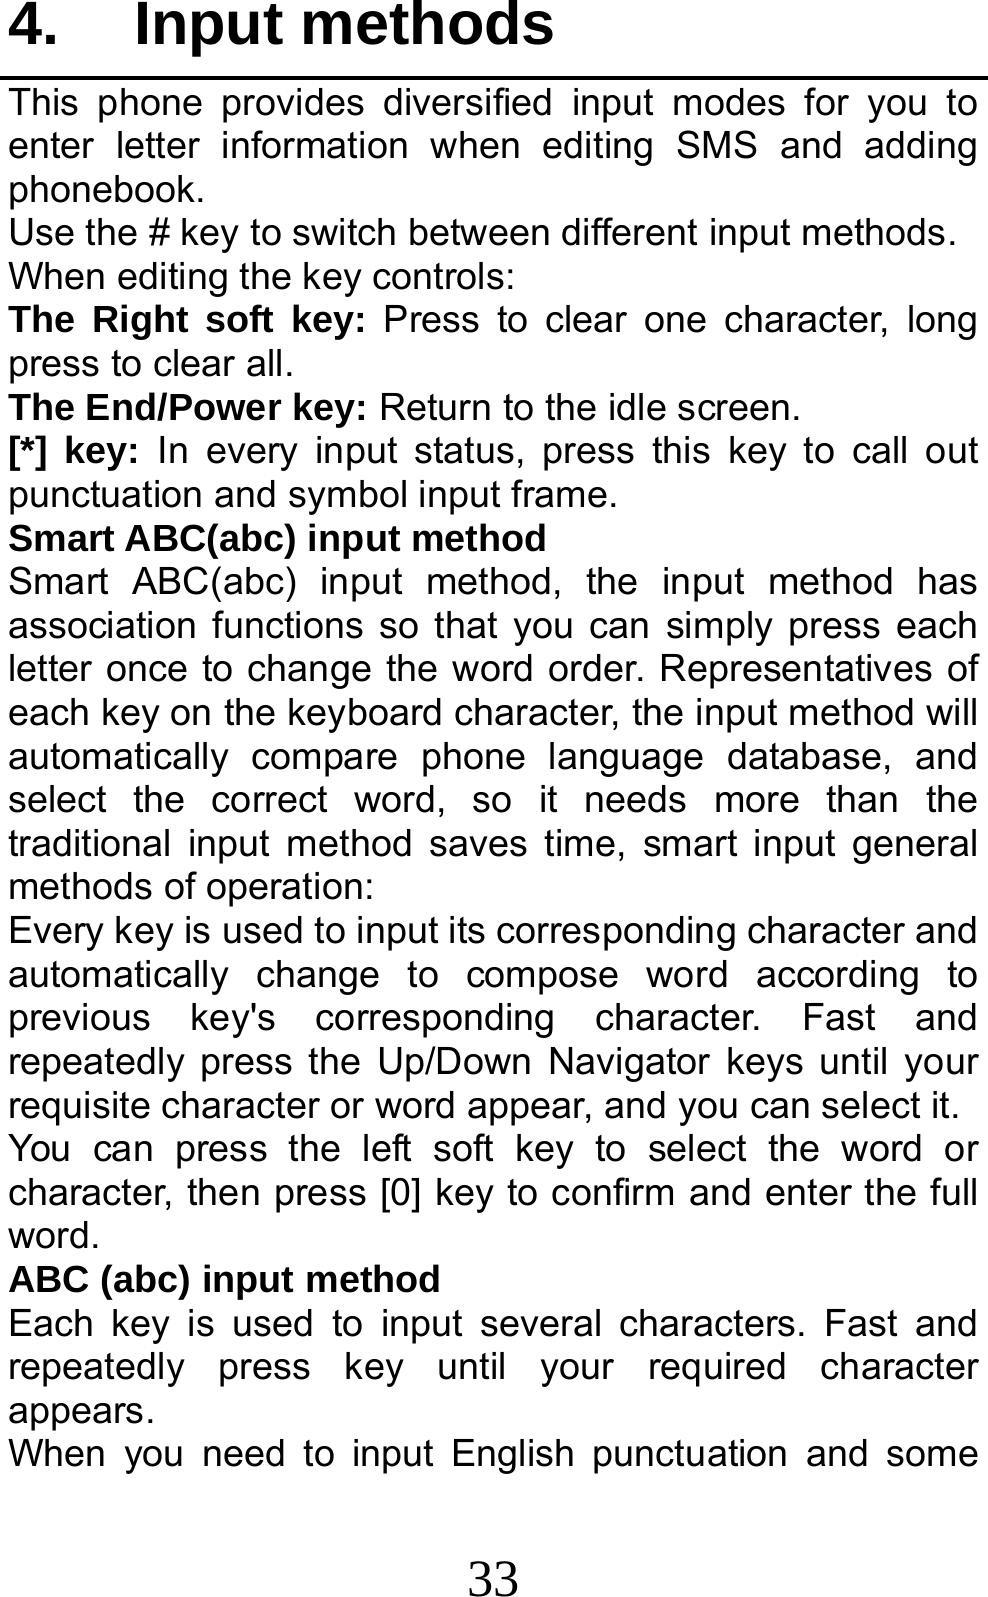 33 4. Input methods This phone provides diversified input modes for you to enter letter information when editing SMS and adding phonebook.  Use the # key to switch between different input methods. When editing the key controls: The Right soft key: Press to clear one character, long press to clear all. The End/Power key: Return to the idle screen. [*] key: In every input status, press this key to call out punctuation and symbol input frame. Smart ABC(abc) input method Smart ABC(abc) input method, the input method has association functions so that you can simply press each letter once to change the word order. Representatives of each key on the keyboard character, the input method will automatically compare phone language database, and select the correct word, so it needs more than the traditional input method saves time, smart input general methods of operation:   Every key is used to input its corresponding character and automatically change to compose word according to previous key&apos;s corresponding character. Fast and repeatedly press the Up/Down Navigator keys until your requisite character or word appear, and you can select it.   You can press the left soft key to select the word or character, then press [0] key to confirm and enter the full word. ABC (abc) input method Each key is used to input several characters. Fast and repeatedly press key until your required character appears. When you need to input English punctuation and some 